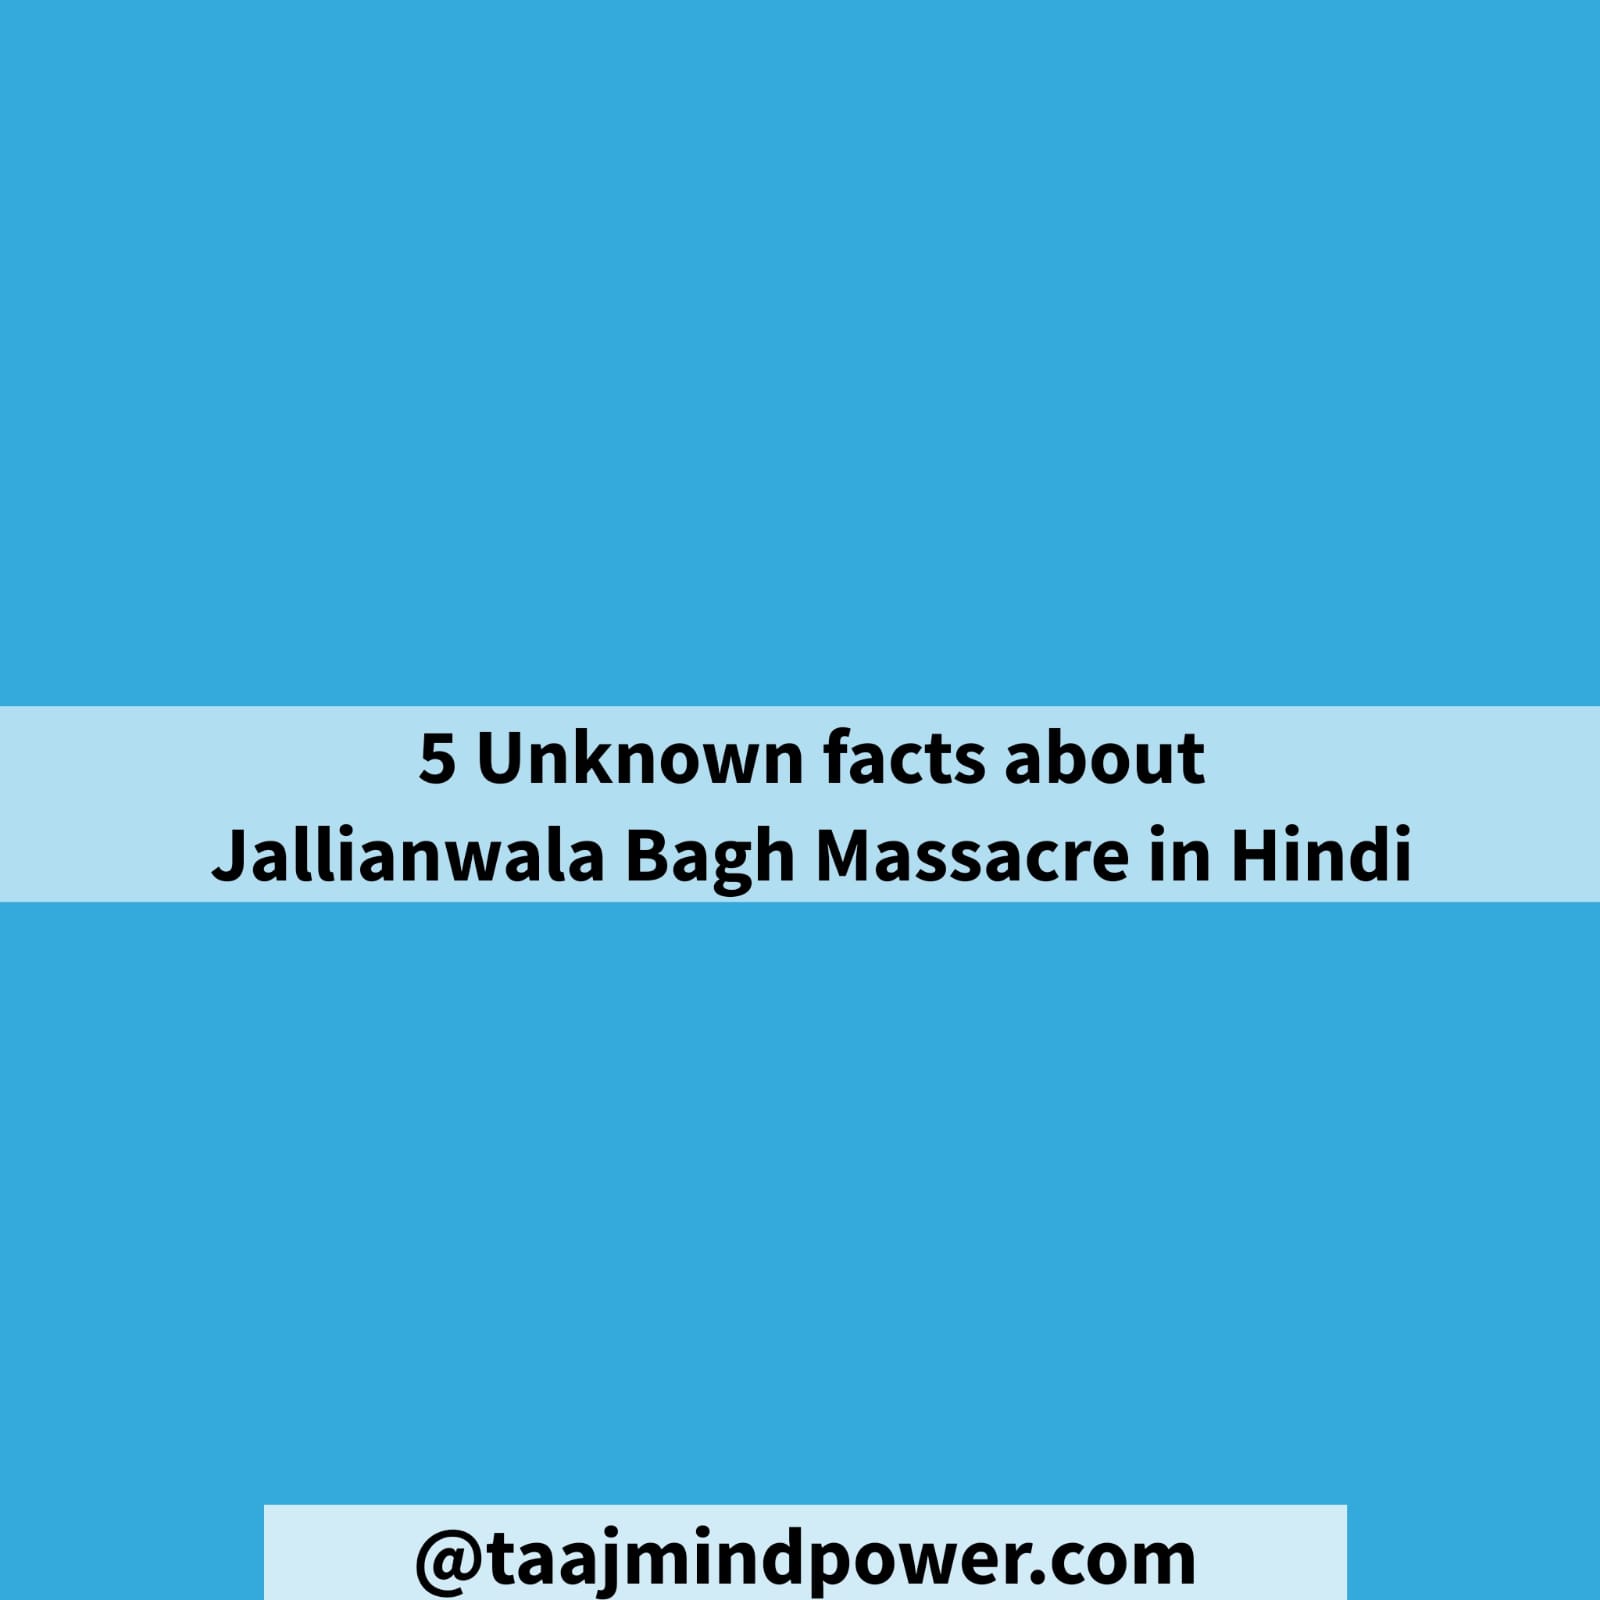 5 Unknown facts about Jallianwala Bagh Massacre in Hindi